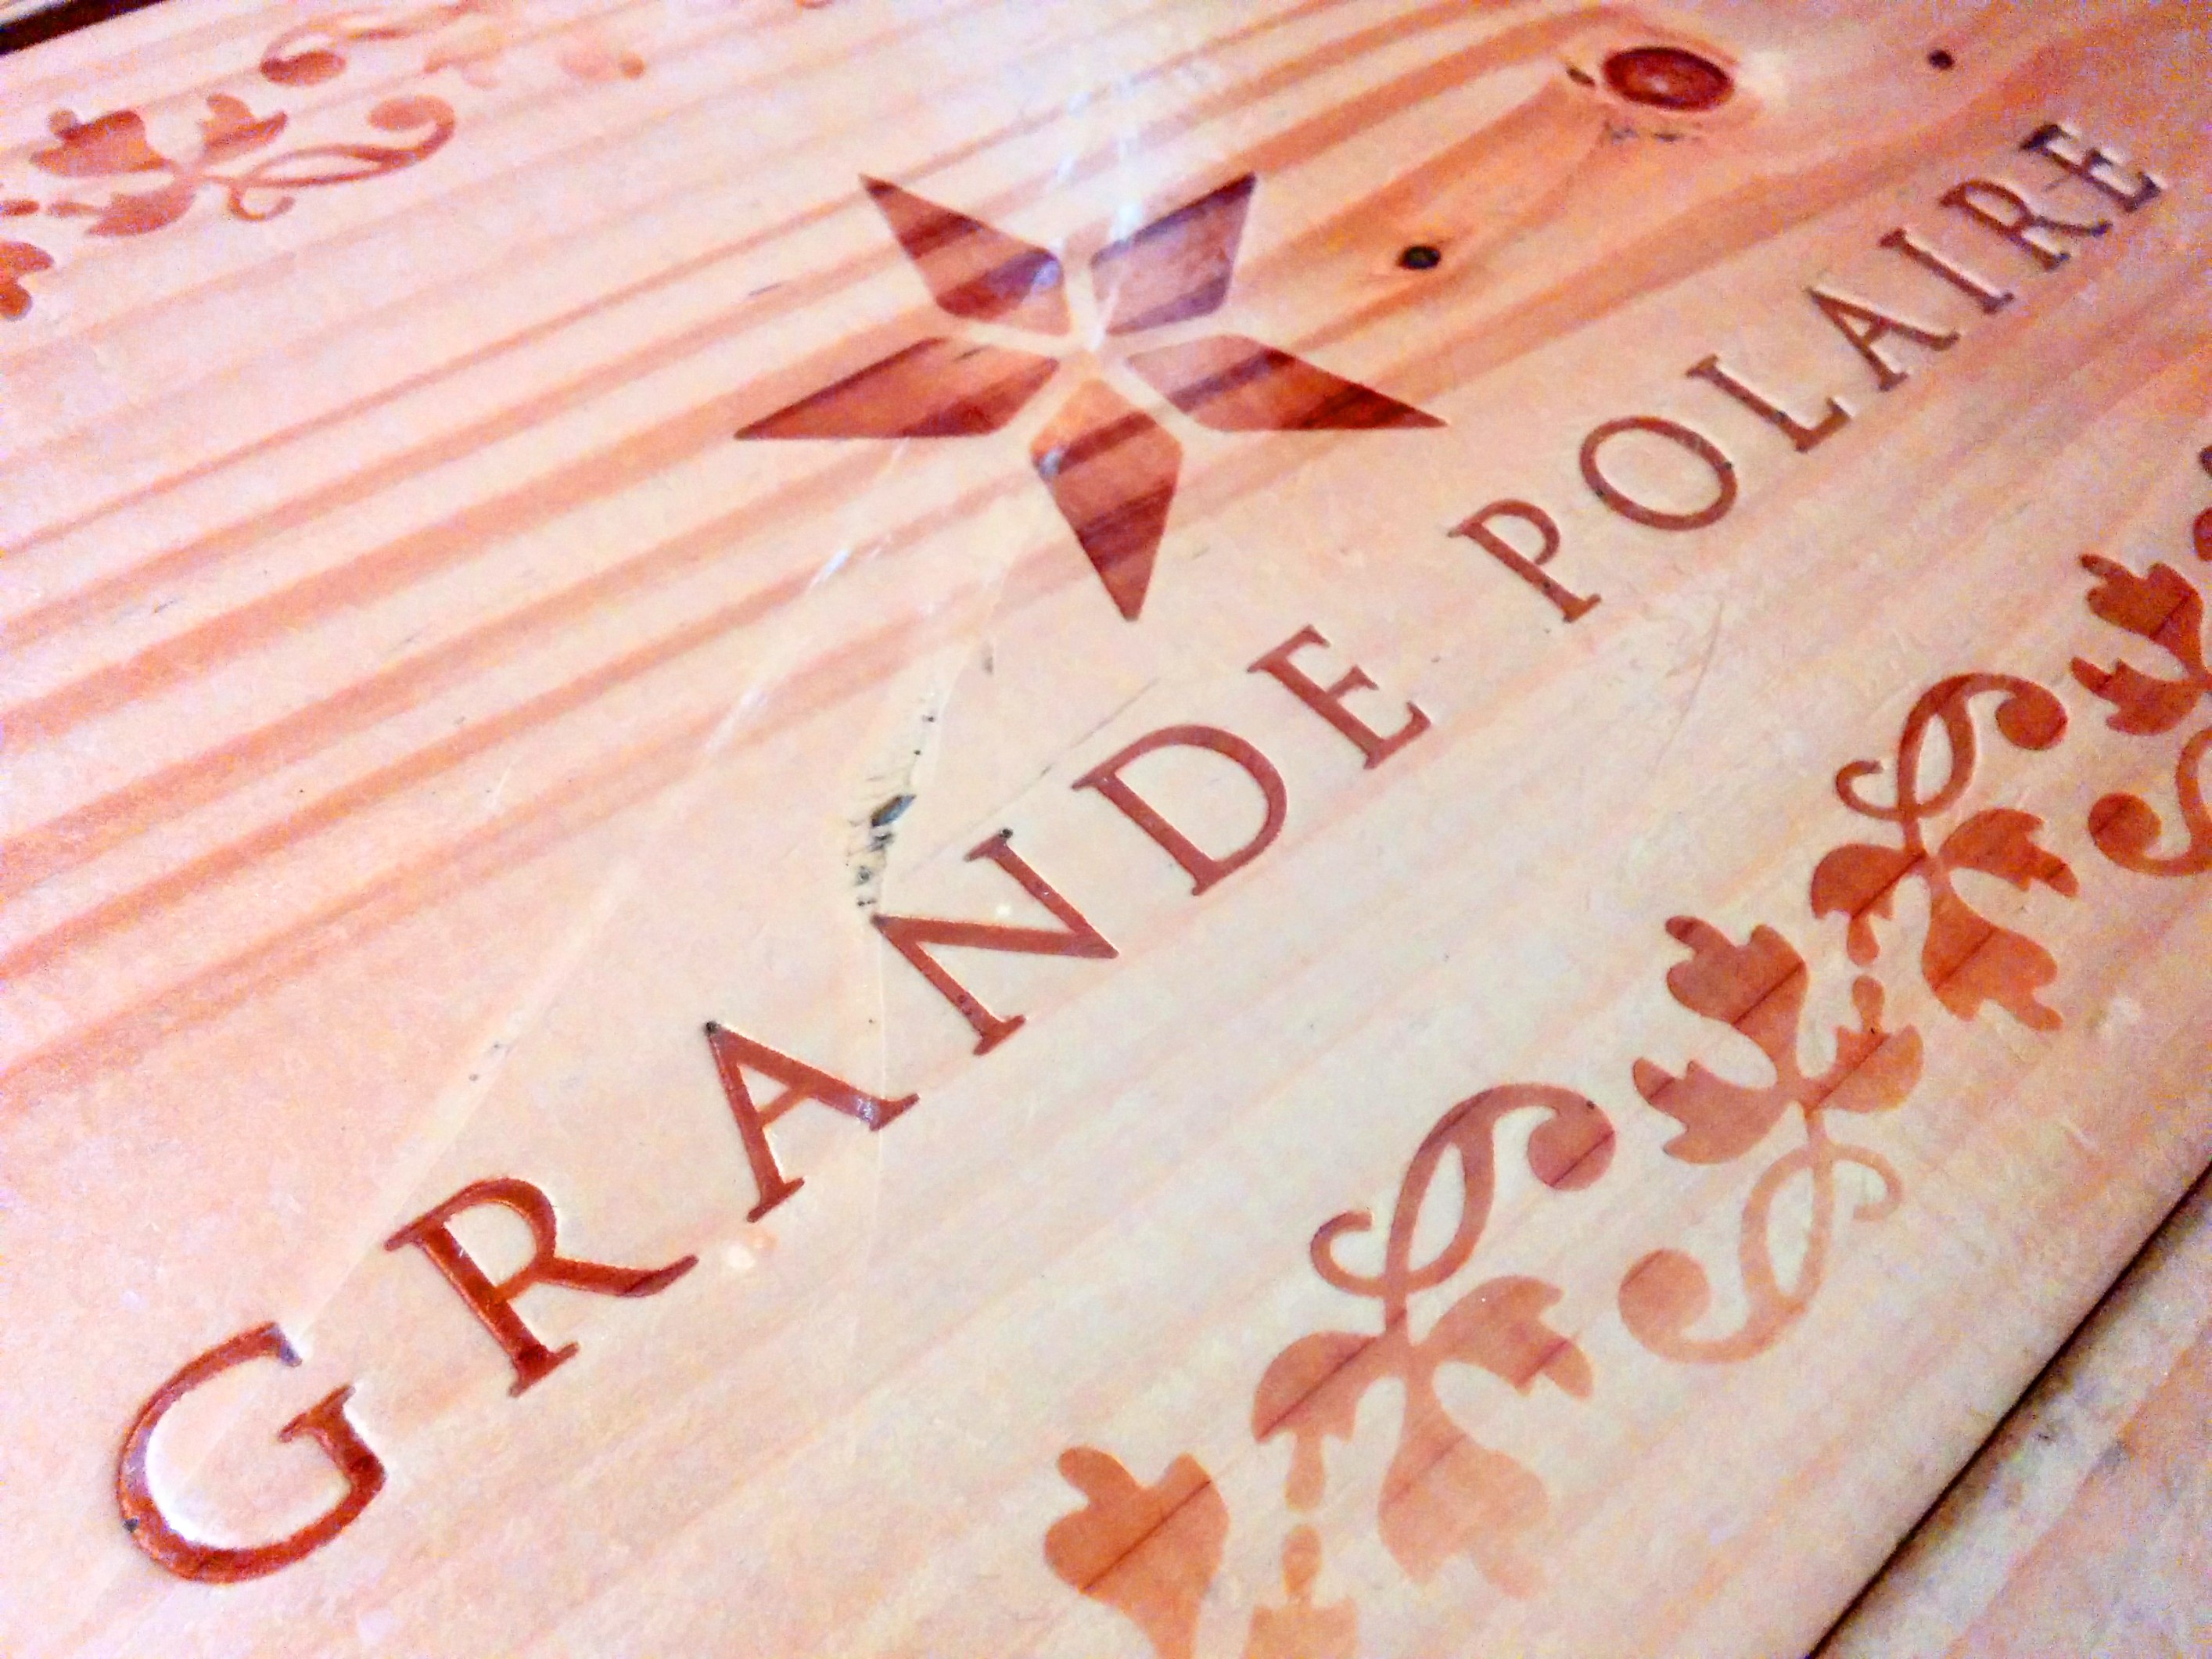 The letter 'GRANDE POLAIRE' is burned on wood table.